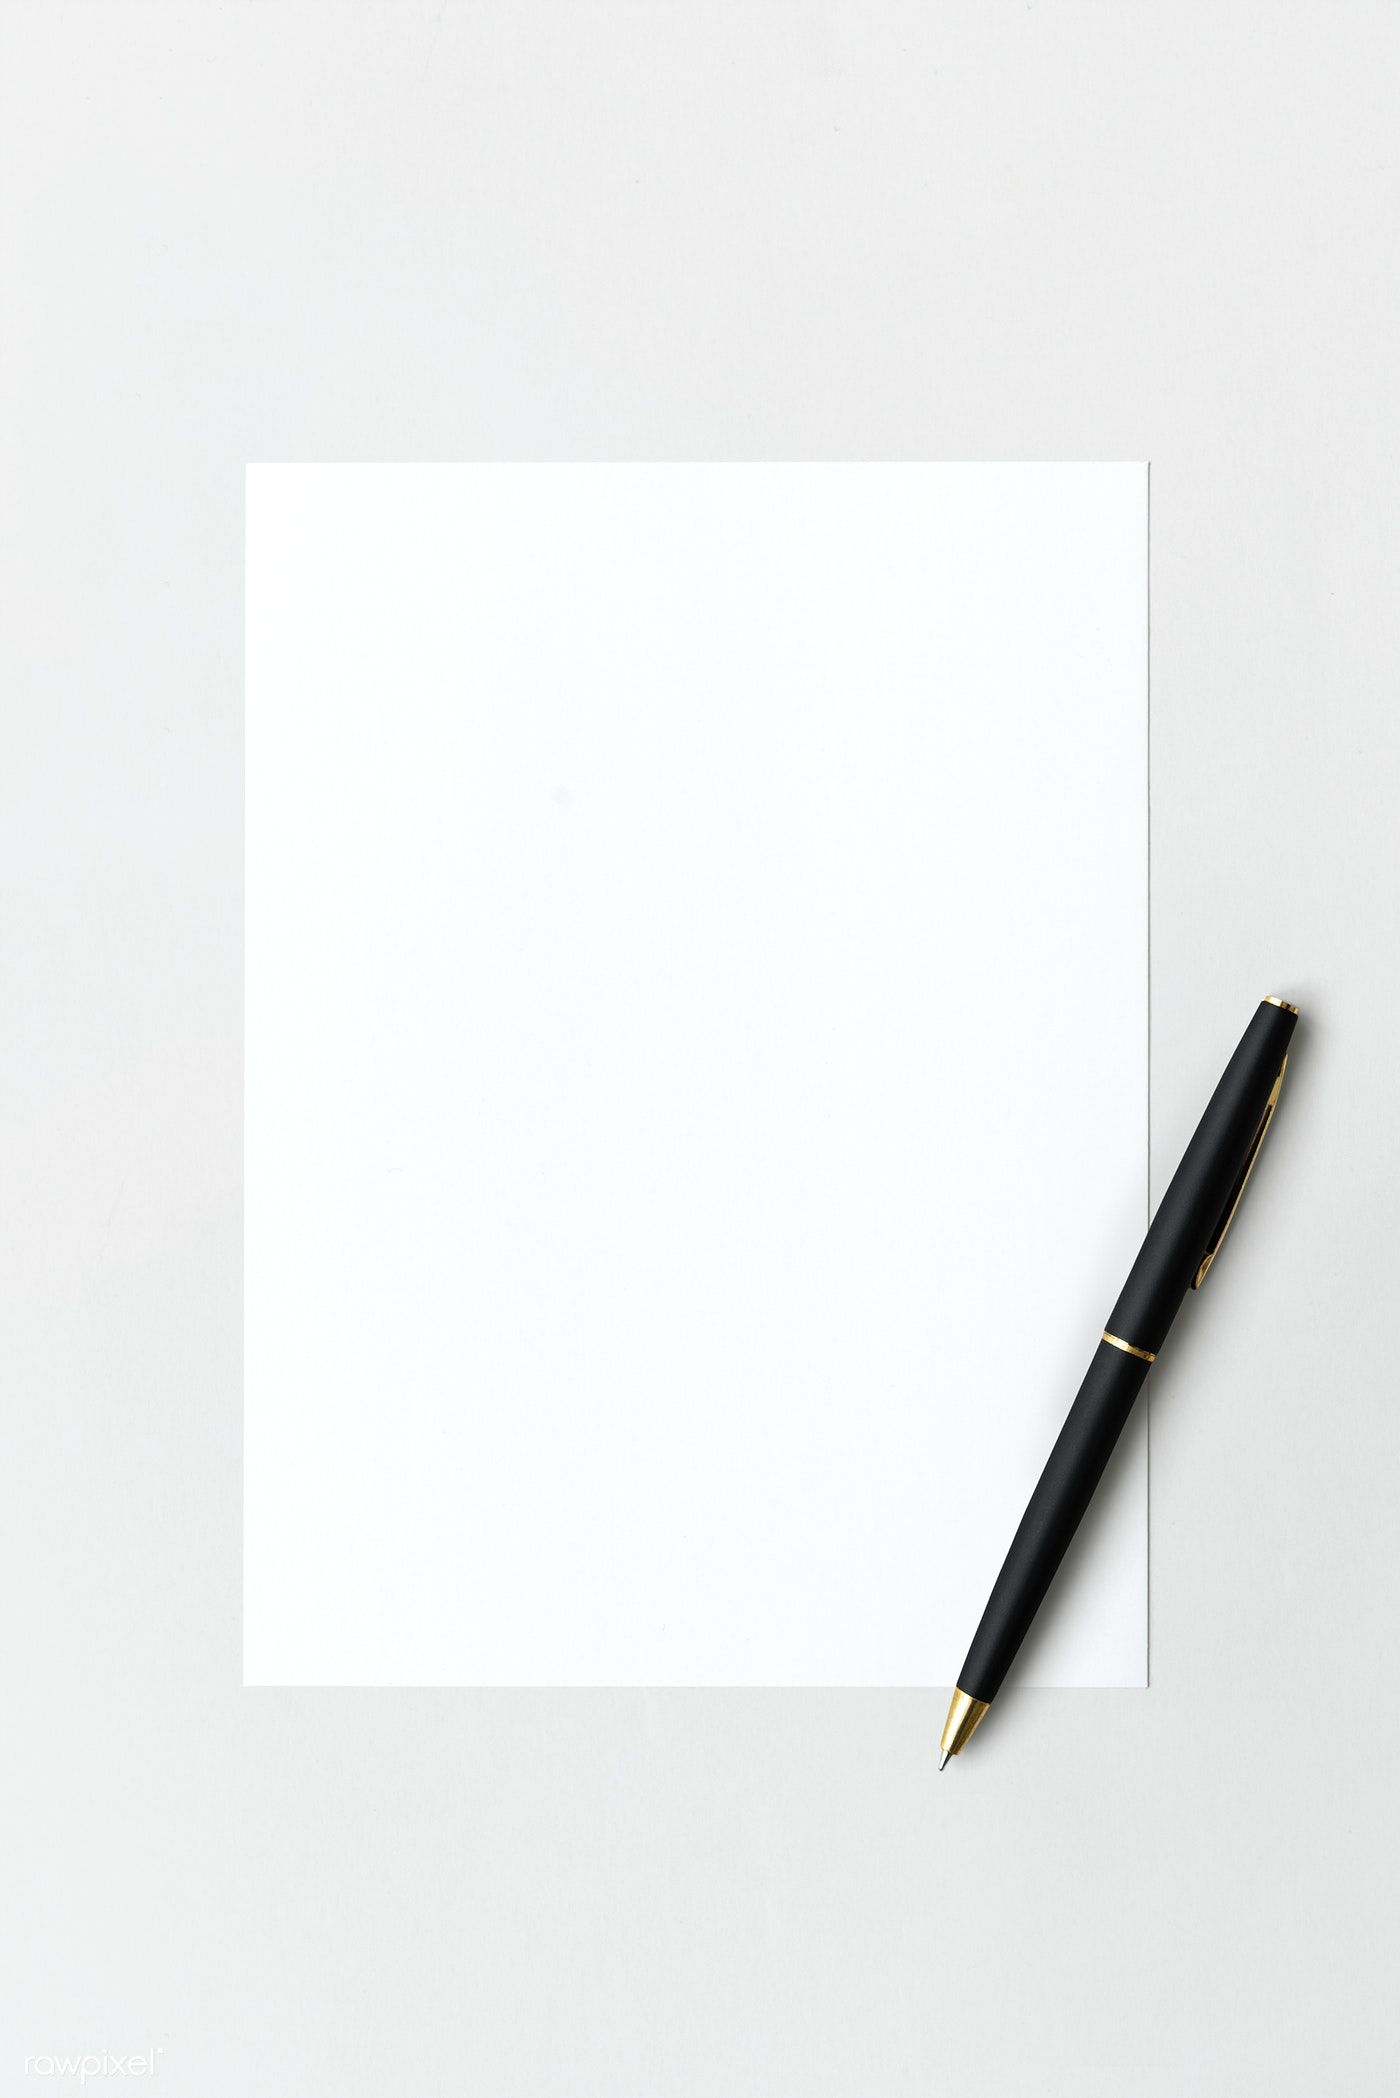 Download premium psd of Blank white paper with black pen 1202057. Paper texture white, Paper background texture, White paper